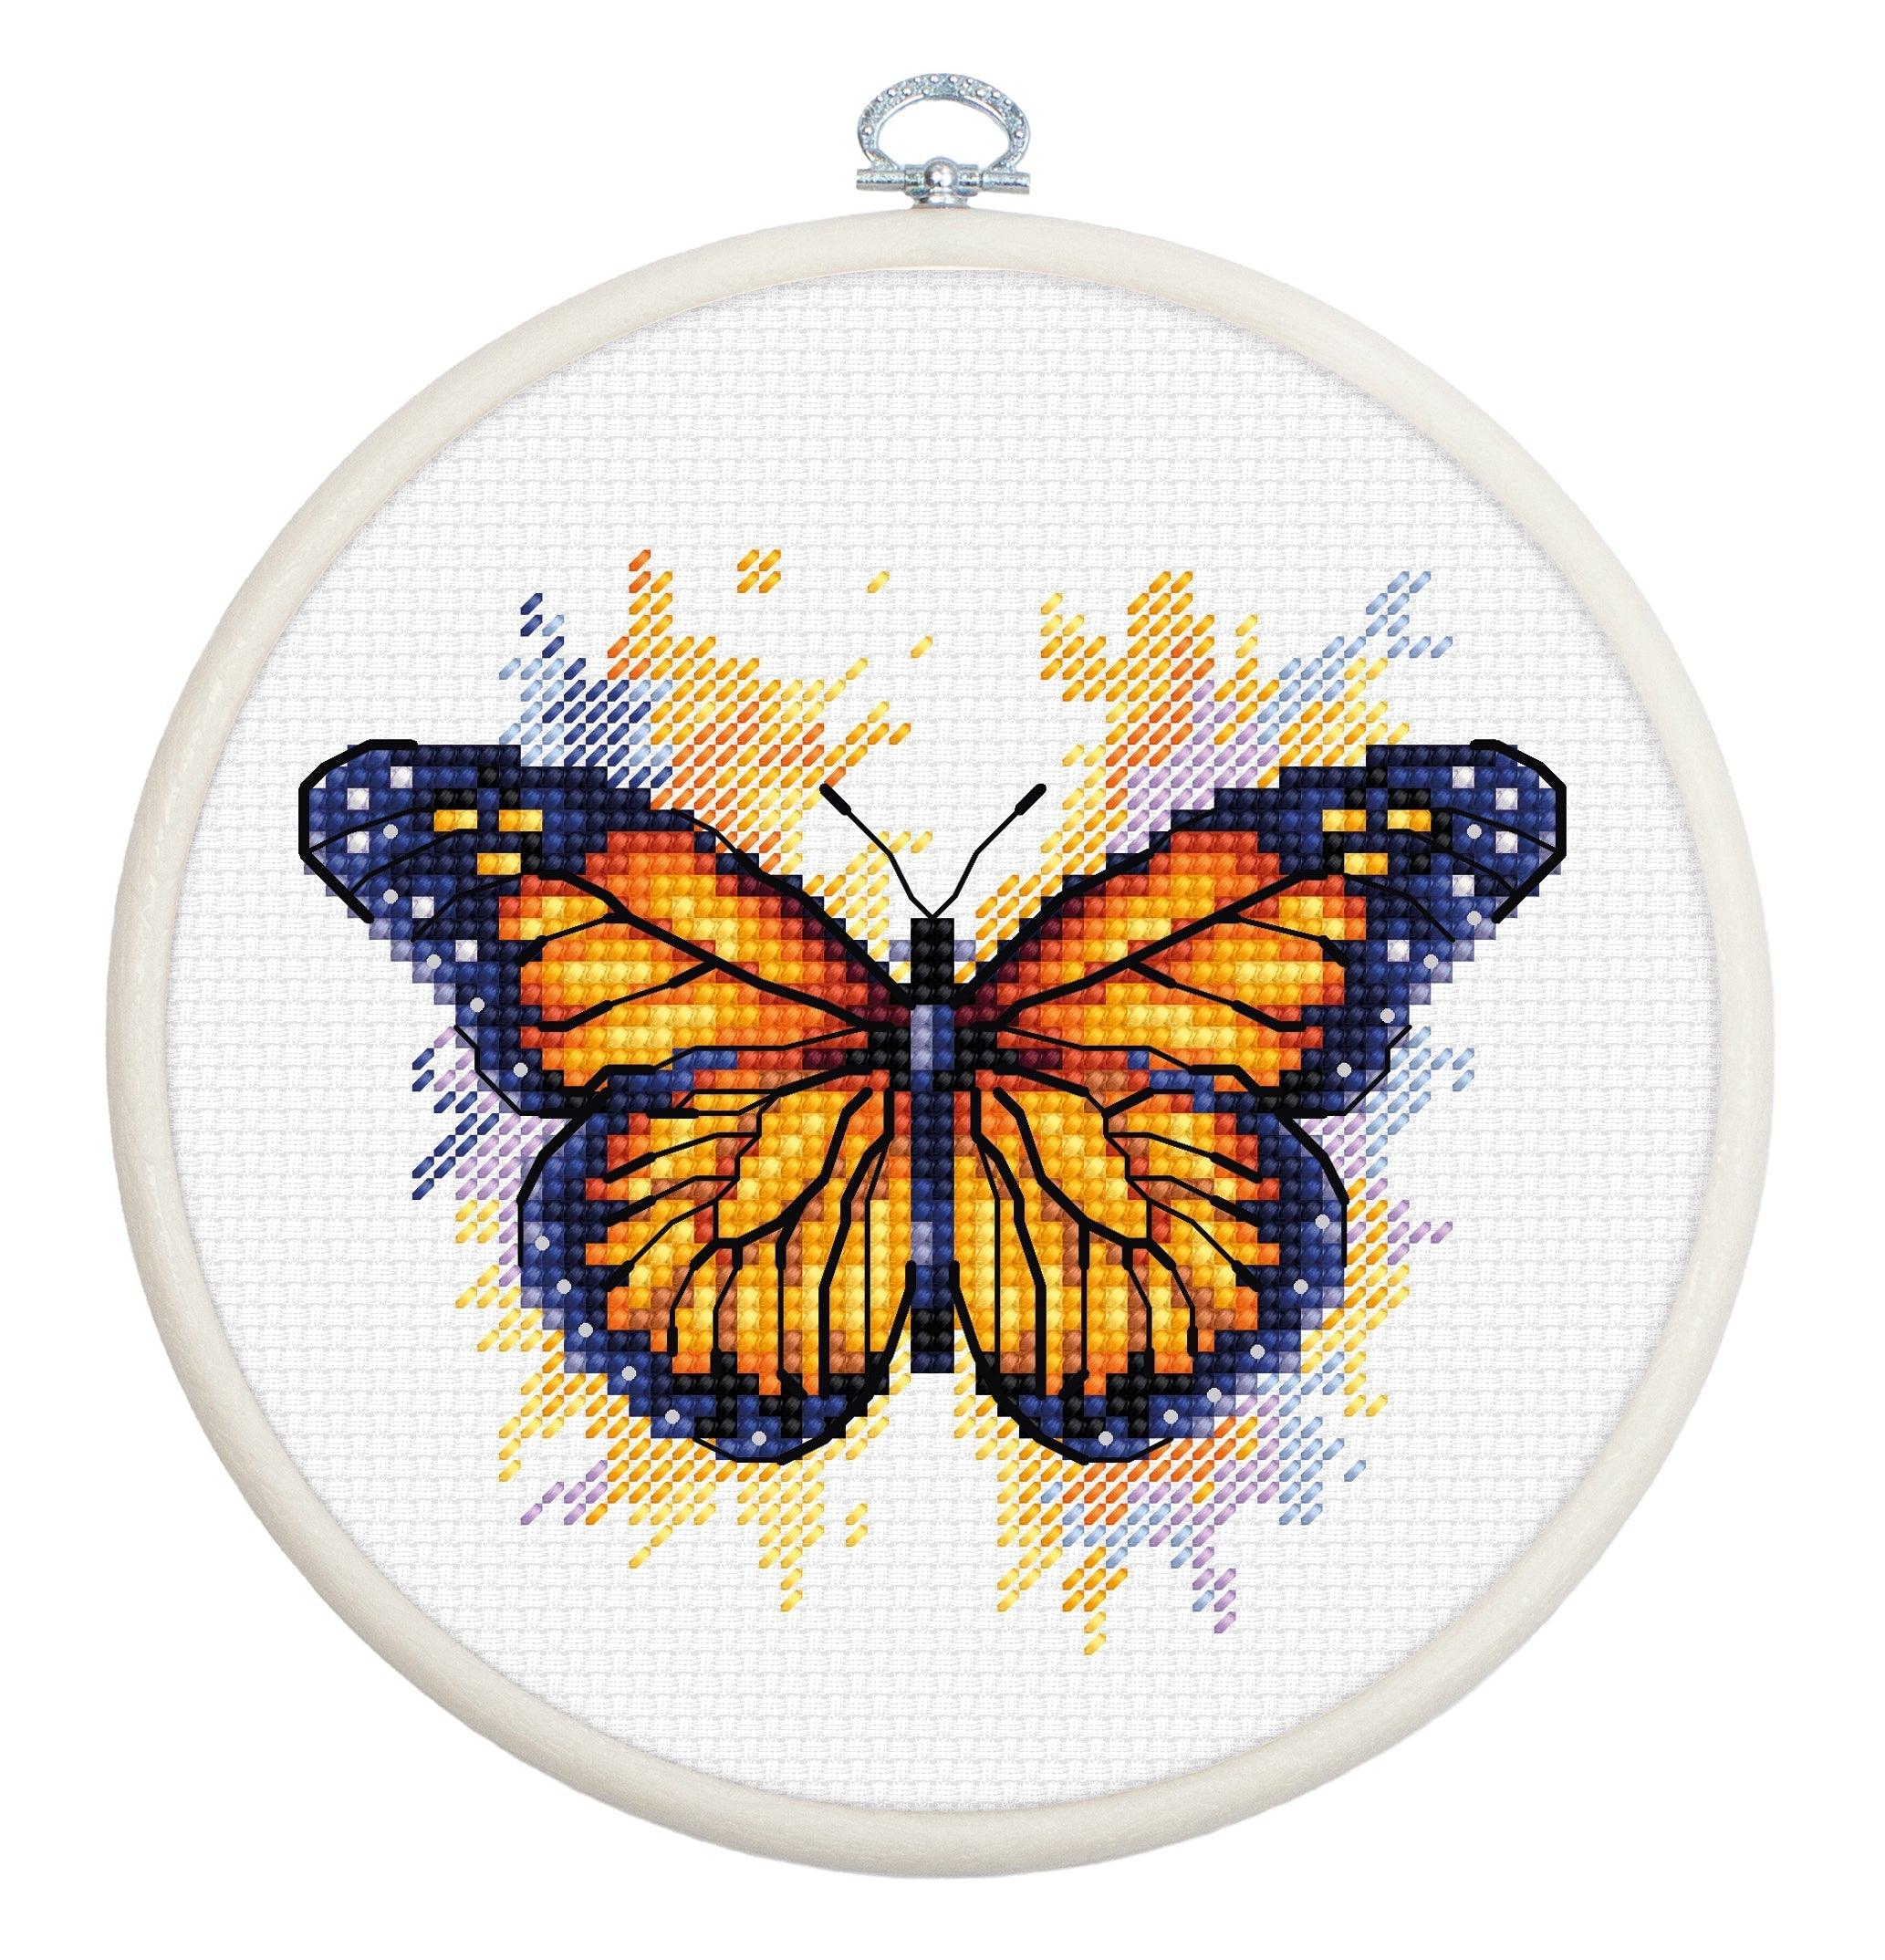 Cross Stitch Kit with Hoop Included Luca-S - The Monarch Butterfly, BC102 - Luca-S Cross Stitch Kits